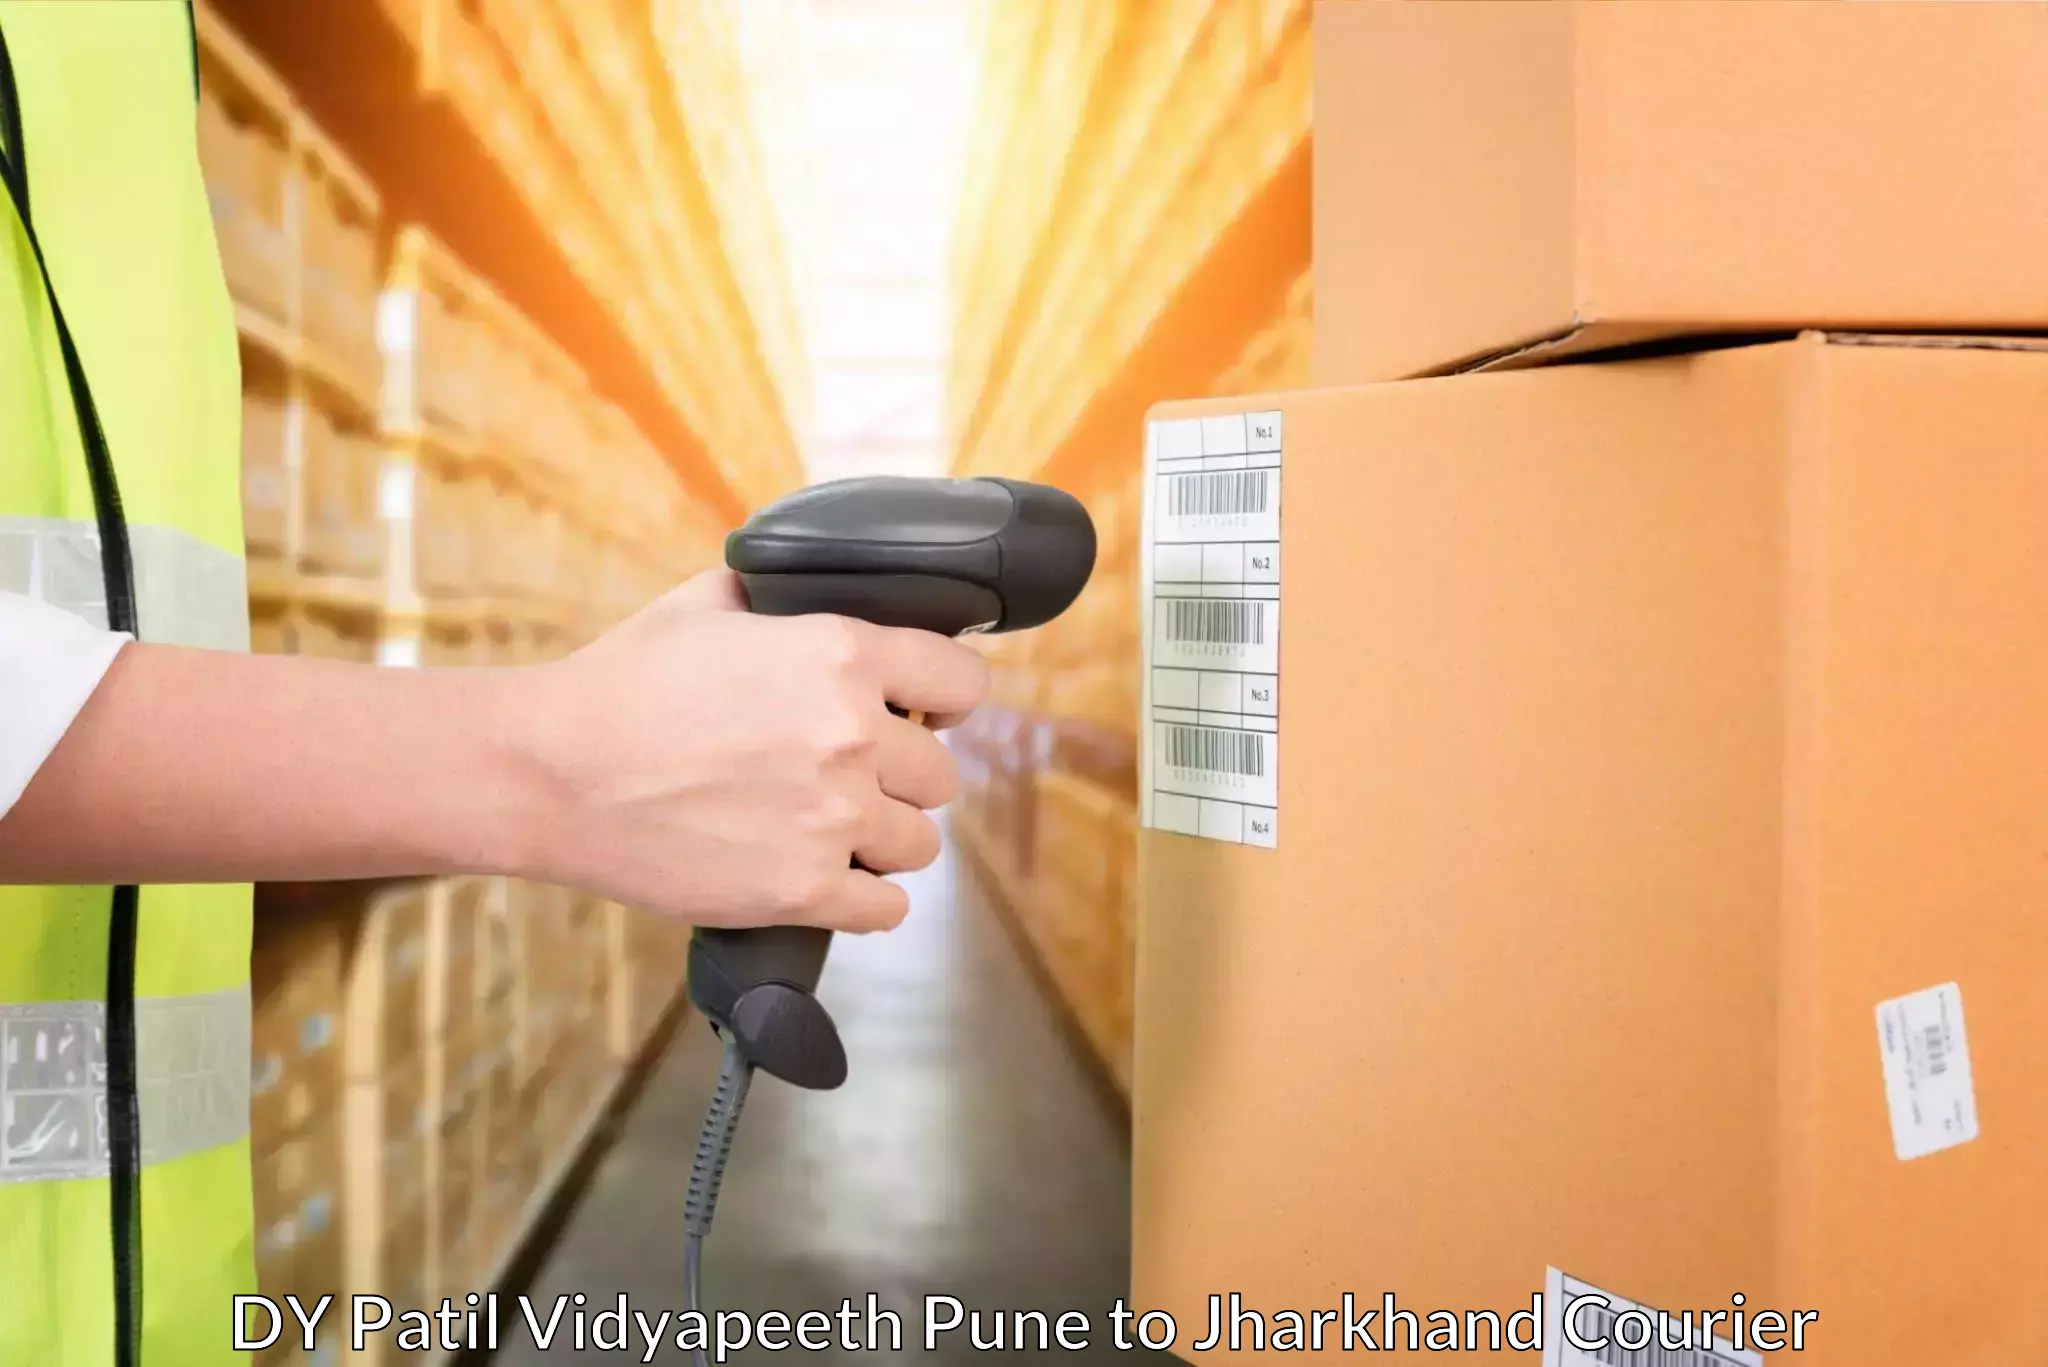 Express delivery capabilities DY Patil Vidyapeeth Pune to Garhwa